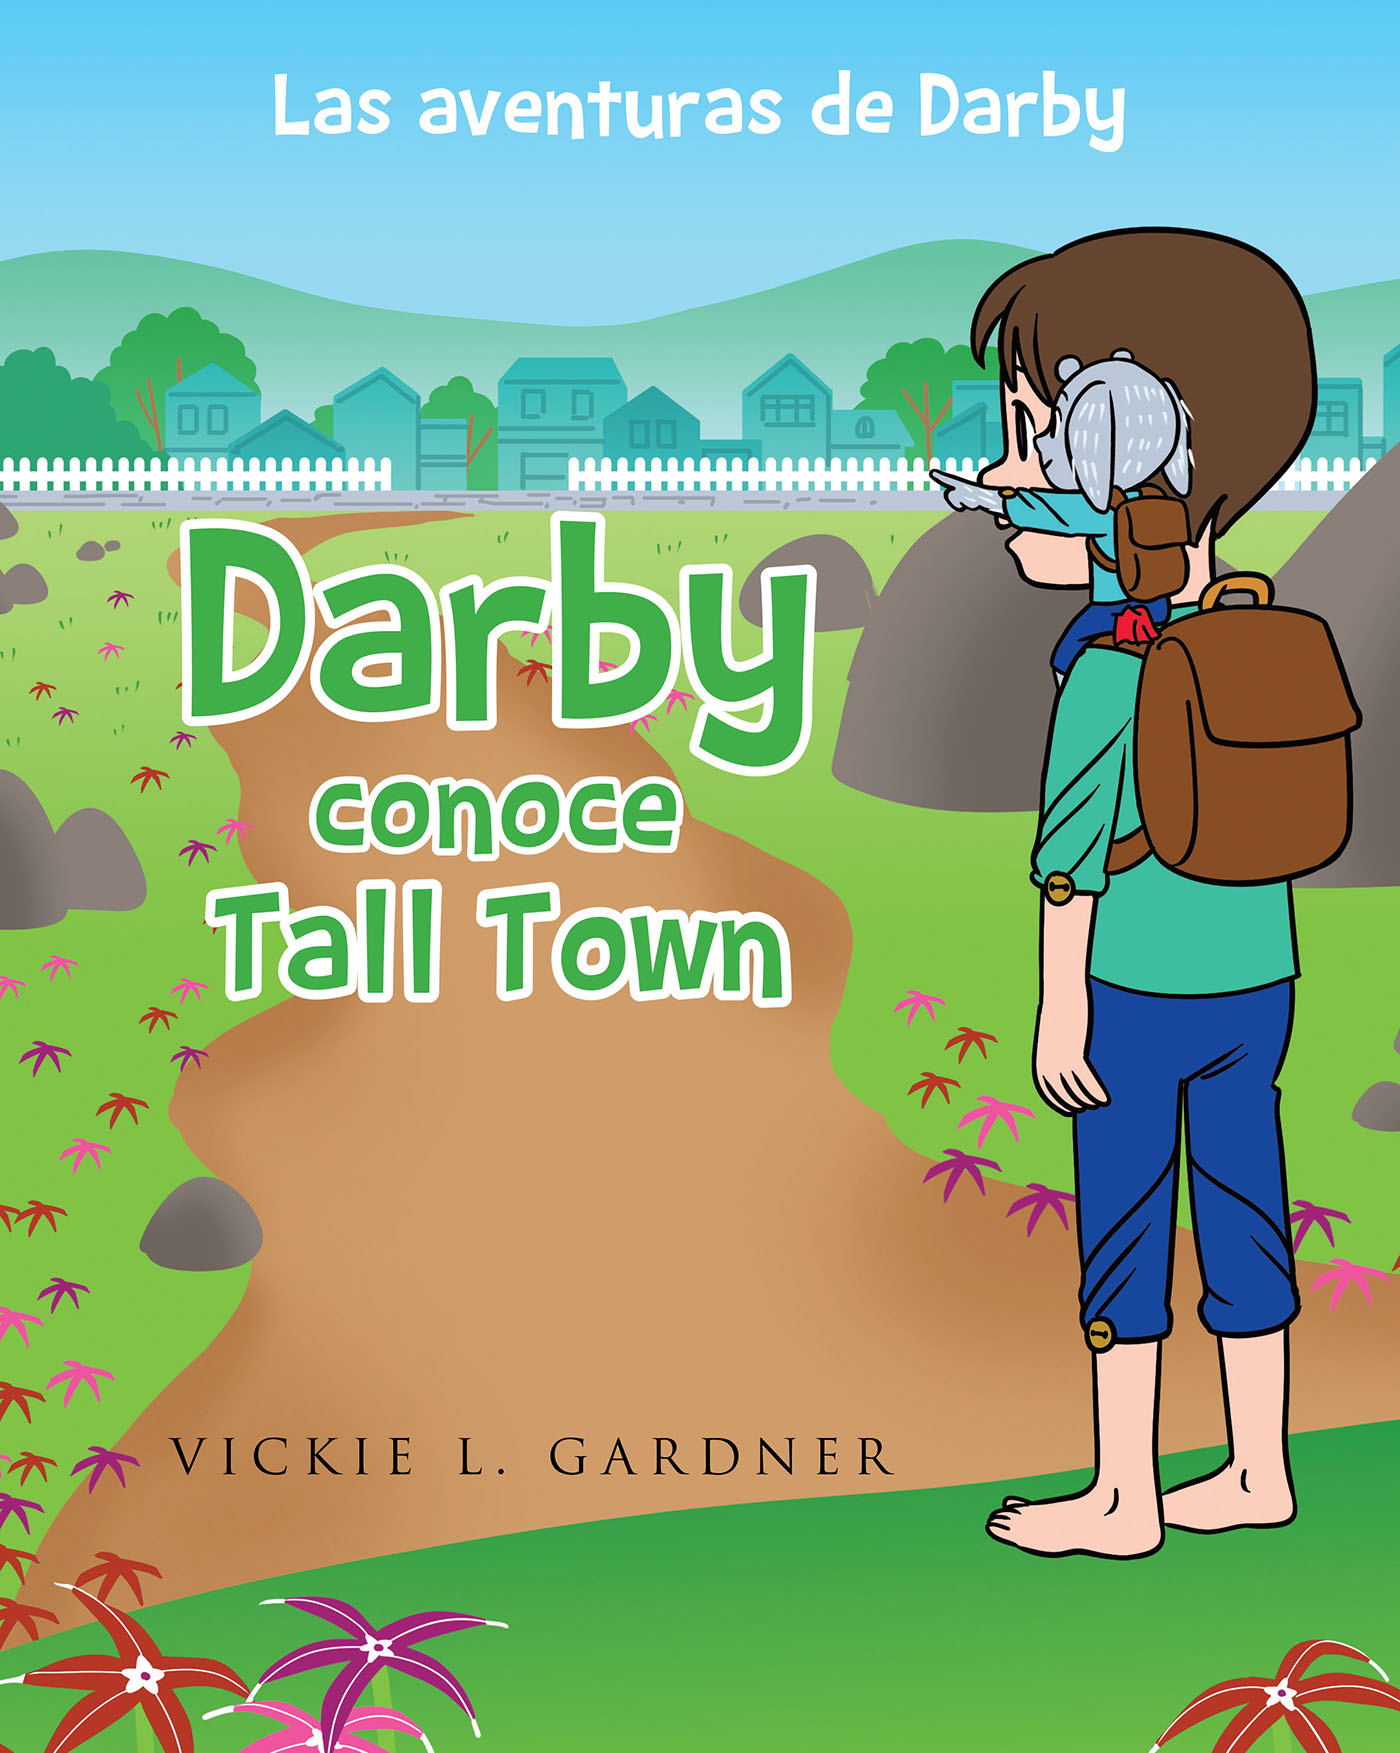 Author Vickie L. Gardner’s New Book, “Las aventuras de Darby: Darby conoce Tall Town,” is an Adventure Story That Teaches Children About the Importance of Helping Others